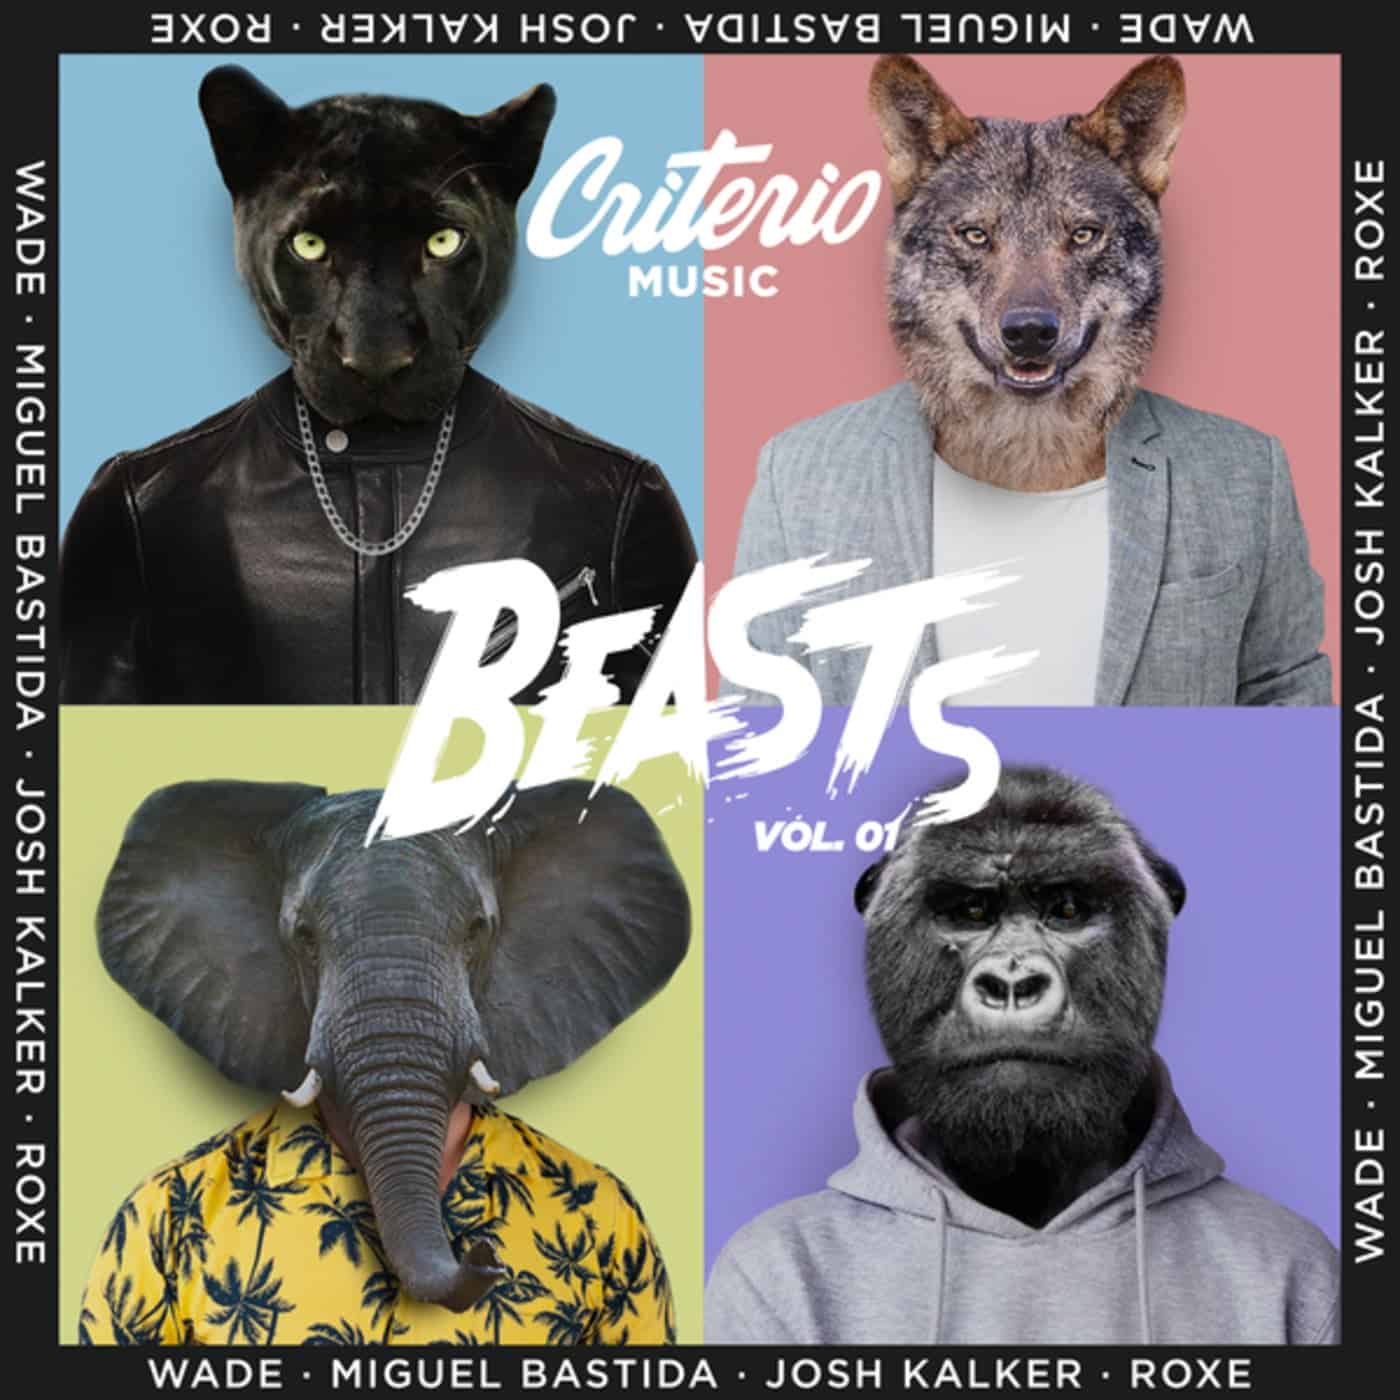 Download Criterio Beasts Vol. I on Electrobuzz